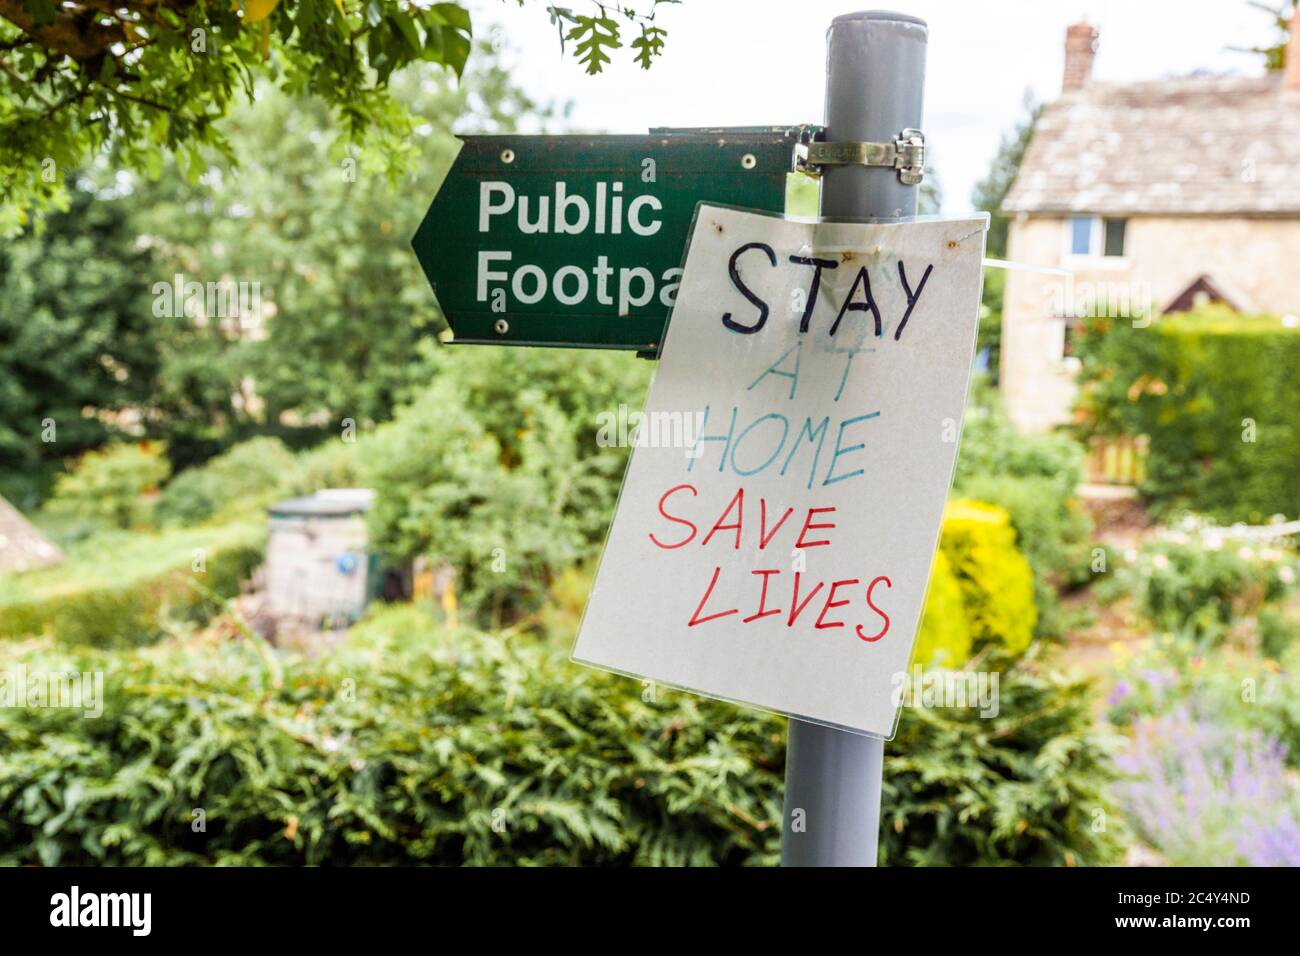 Stay at Home, Save Lives notice tied to a public footpath sign during the Covid 19 pandemic in the Cotswold village of Sapperton, Gloucestershire UK Stock Photo